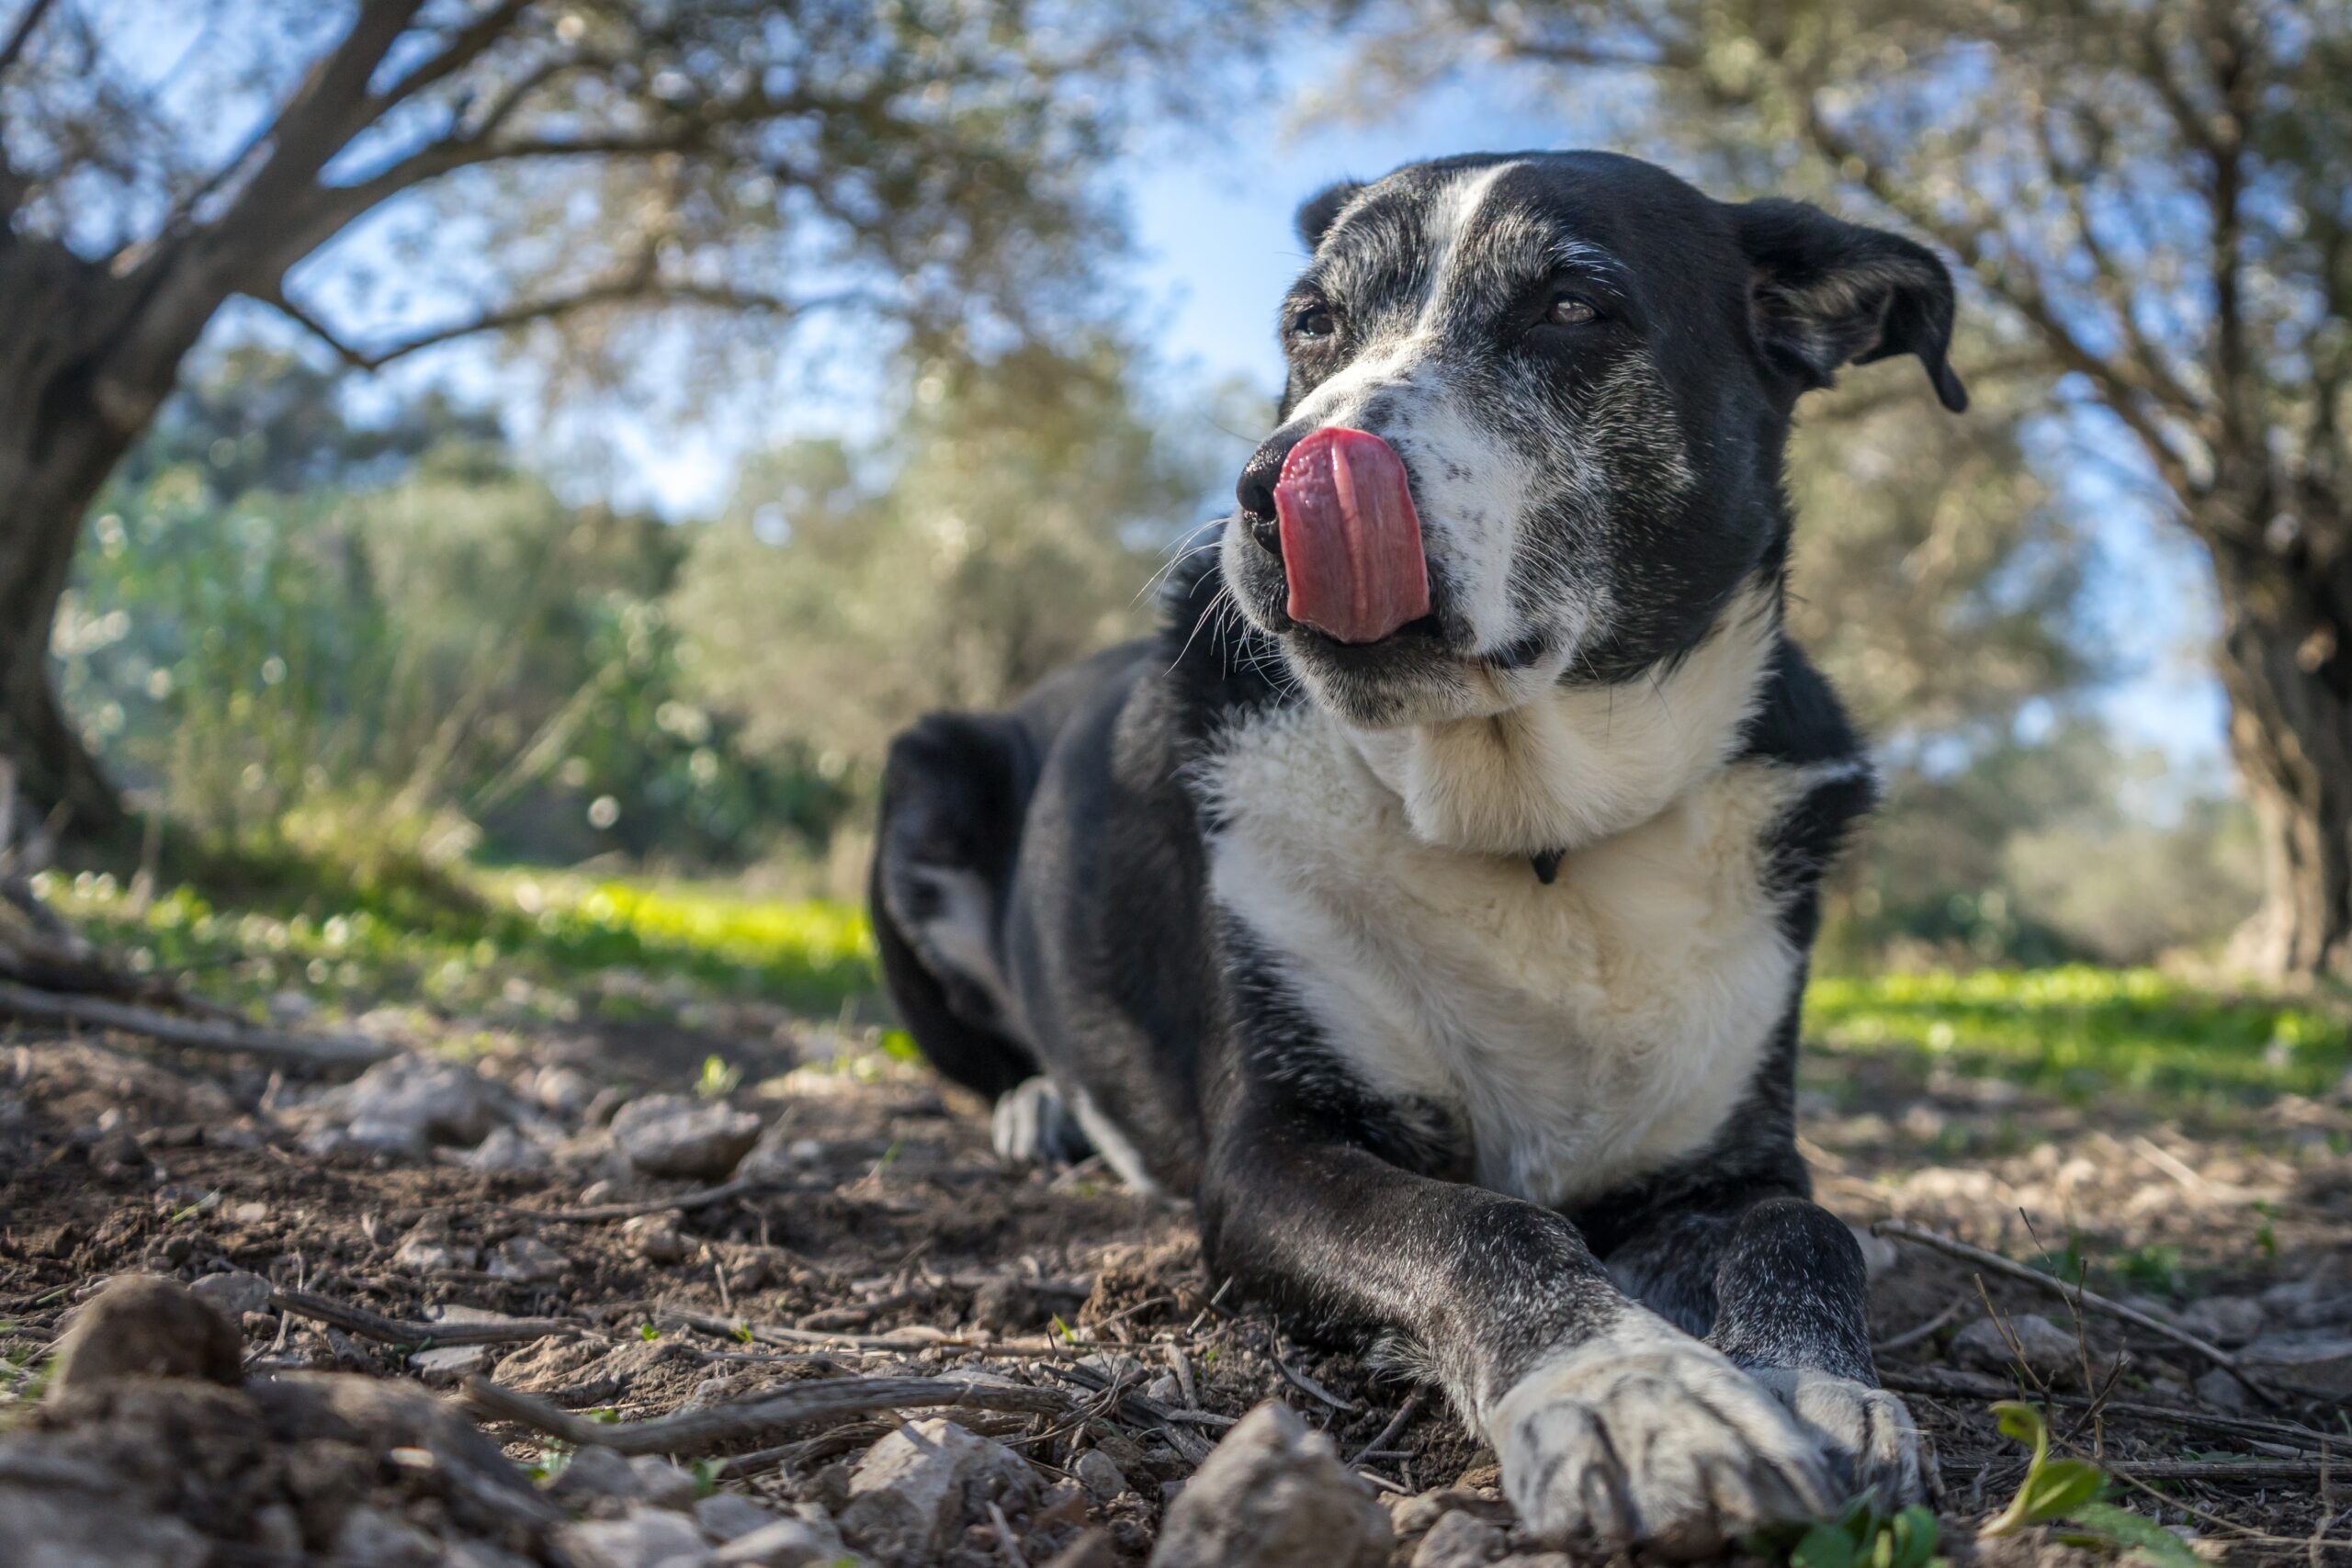 Shallow focus shot of an old dog resting on the ground while licking its nose